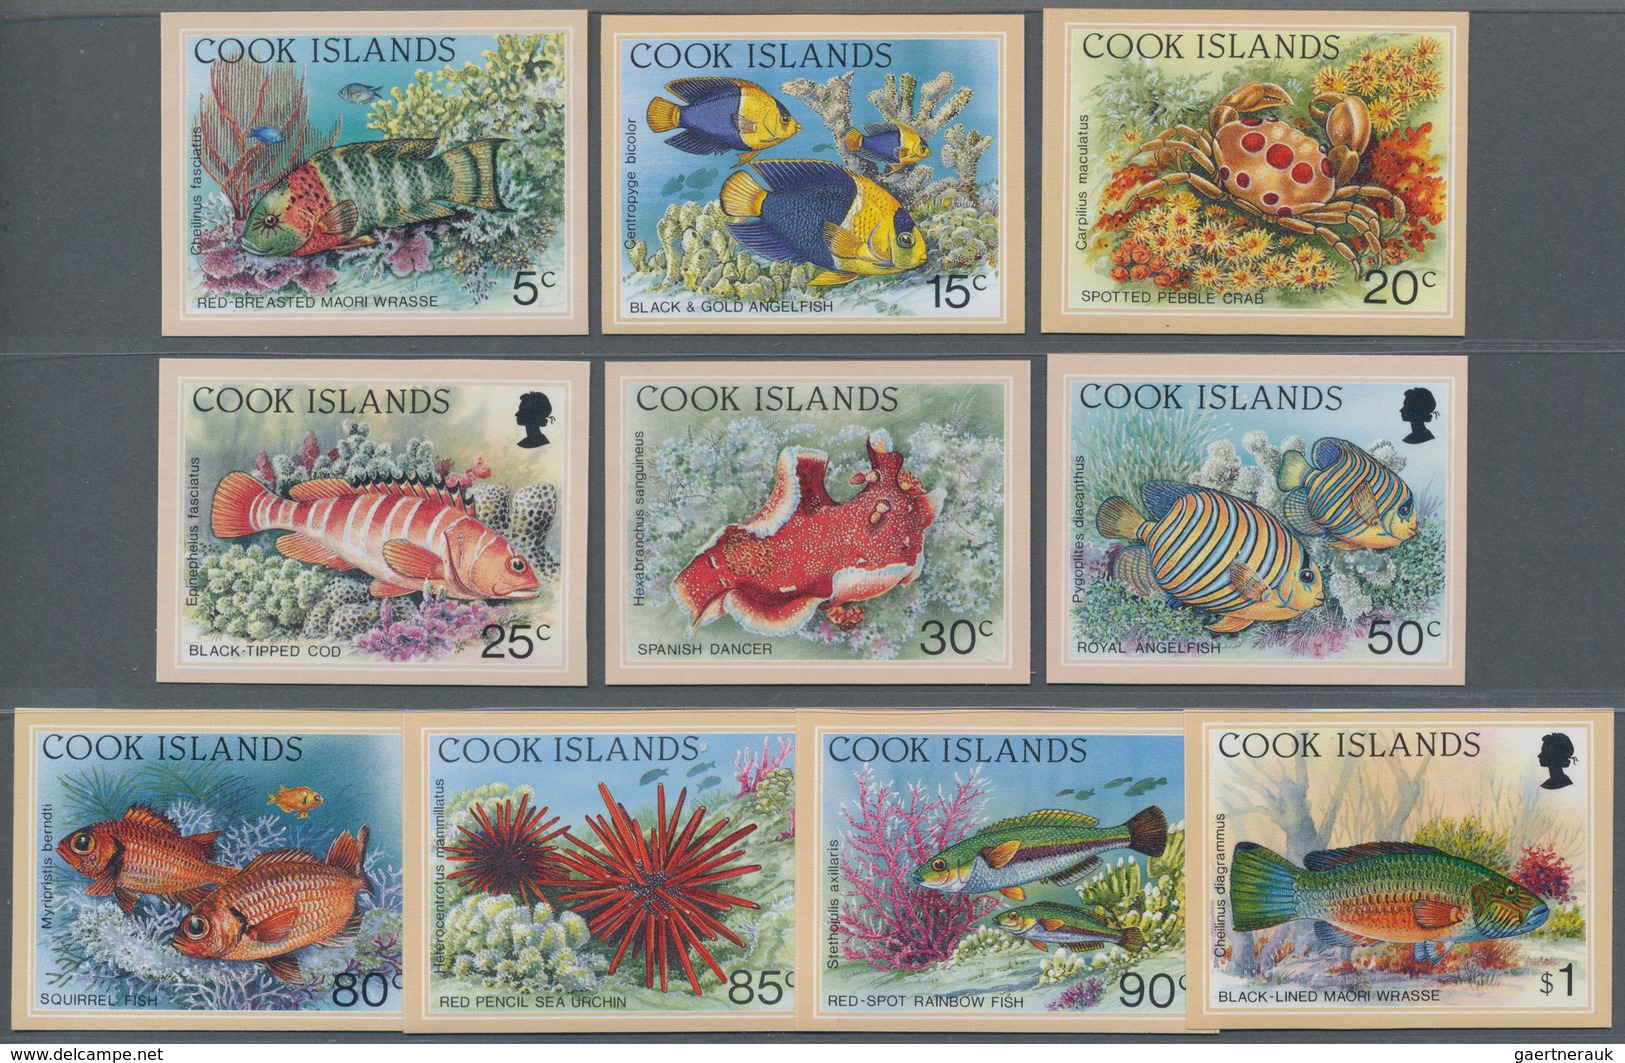 Cook-Inseln: 1994, Life On The Coral Reef Complete IMPERFORATE Set Of Ten (fishes, Crab Etc.), Mint - Cookeilanden